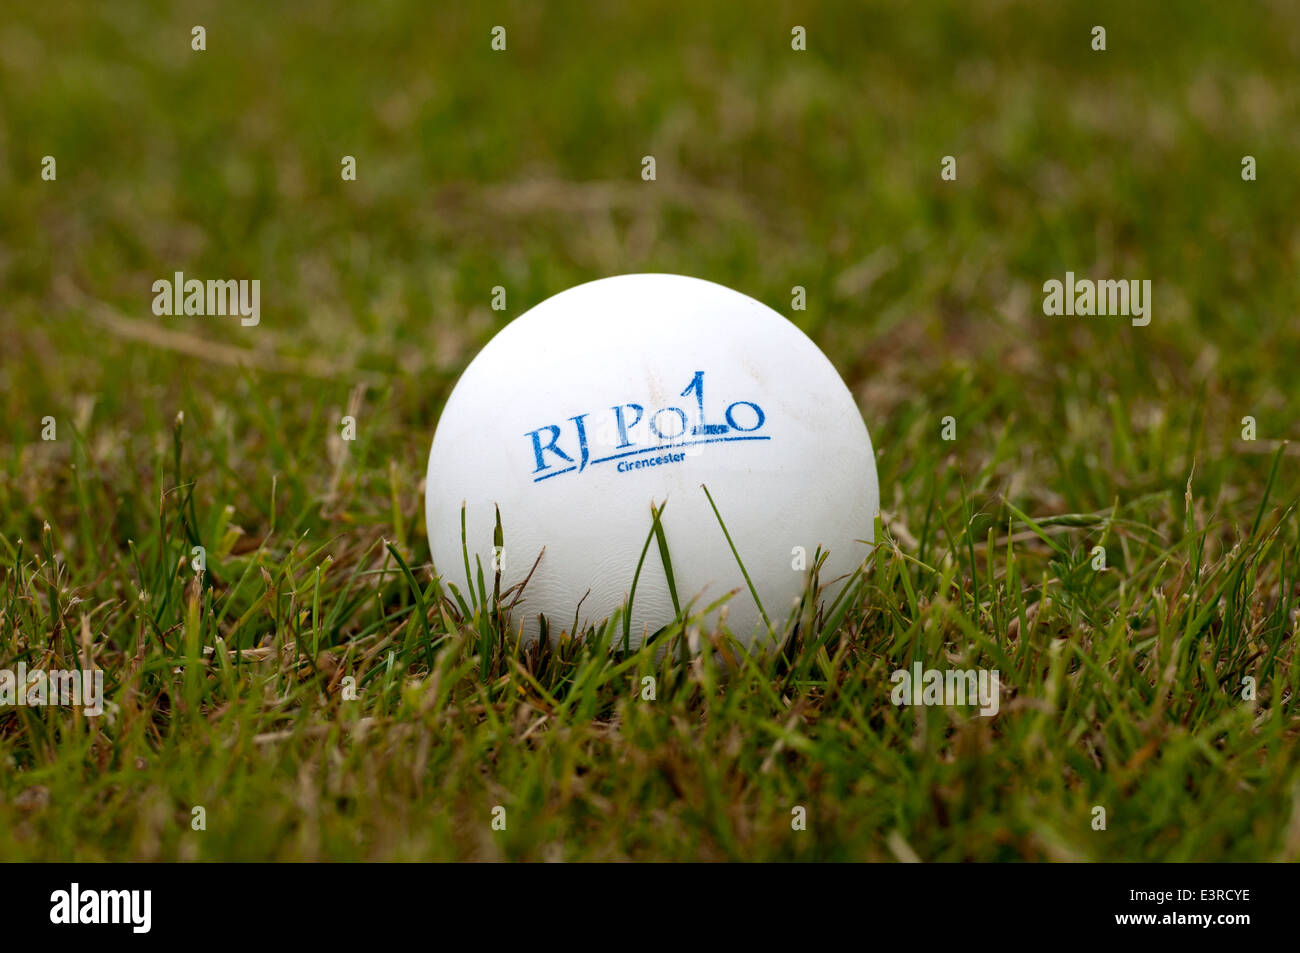 grass balls on polo stock and images - Alamy